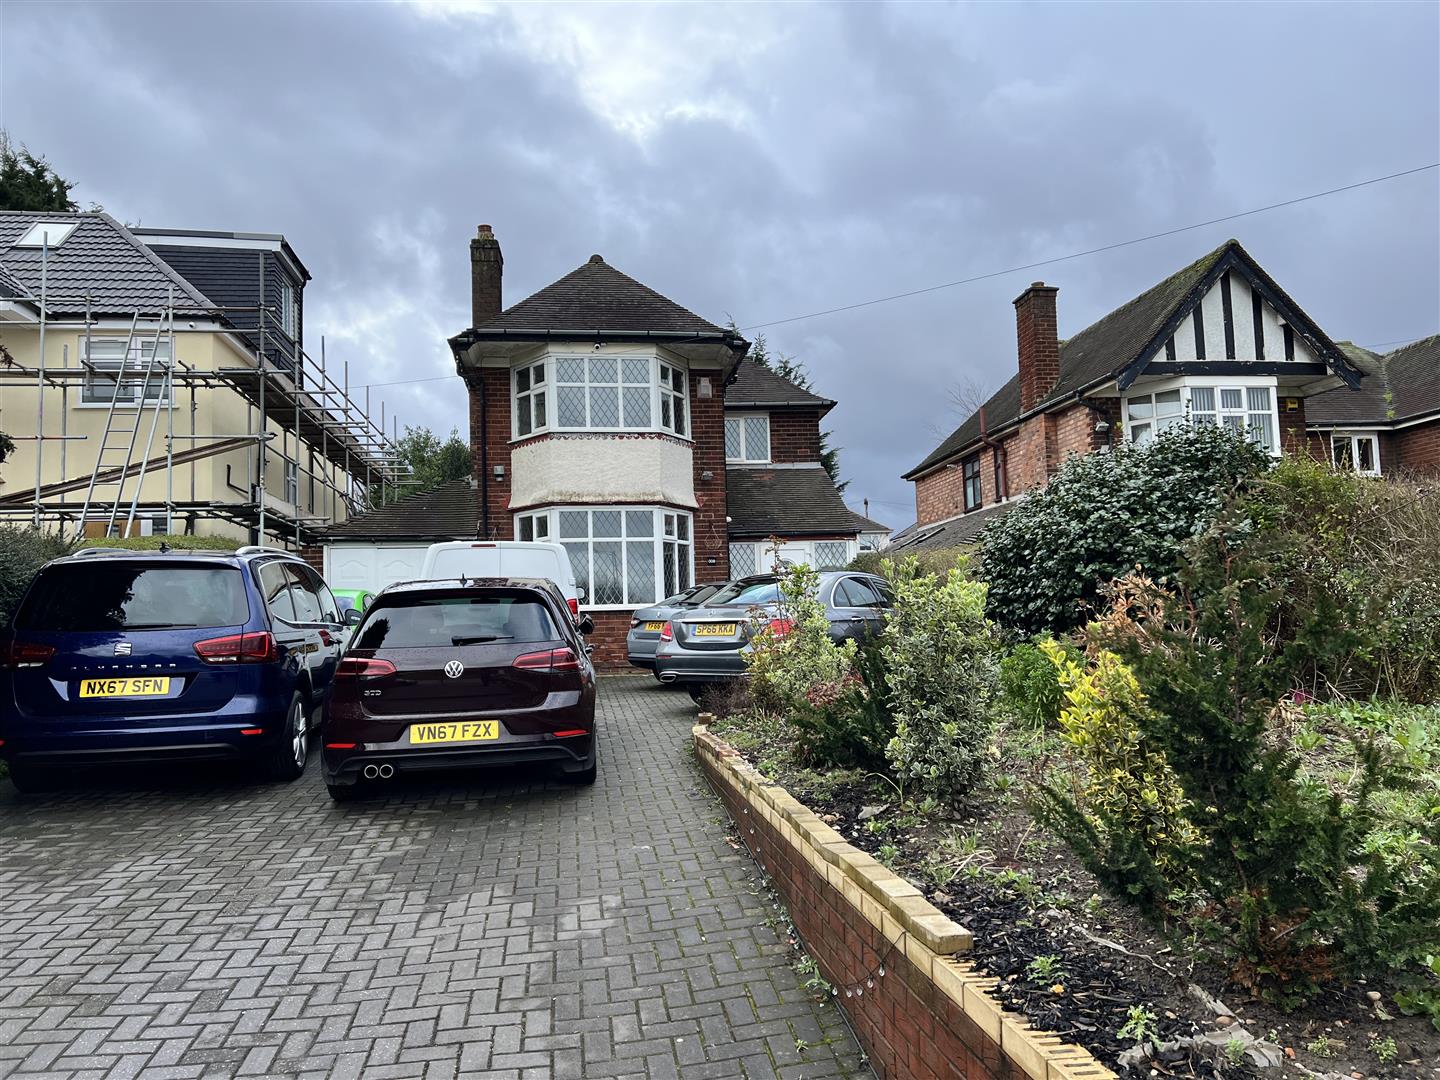 3 bed detached house for sale in Coleshill Road, Birmingham - Property Image 1